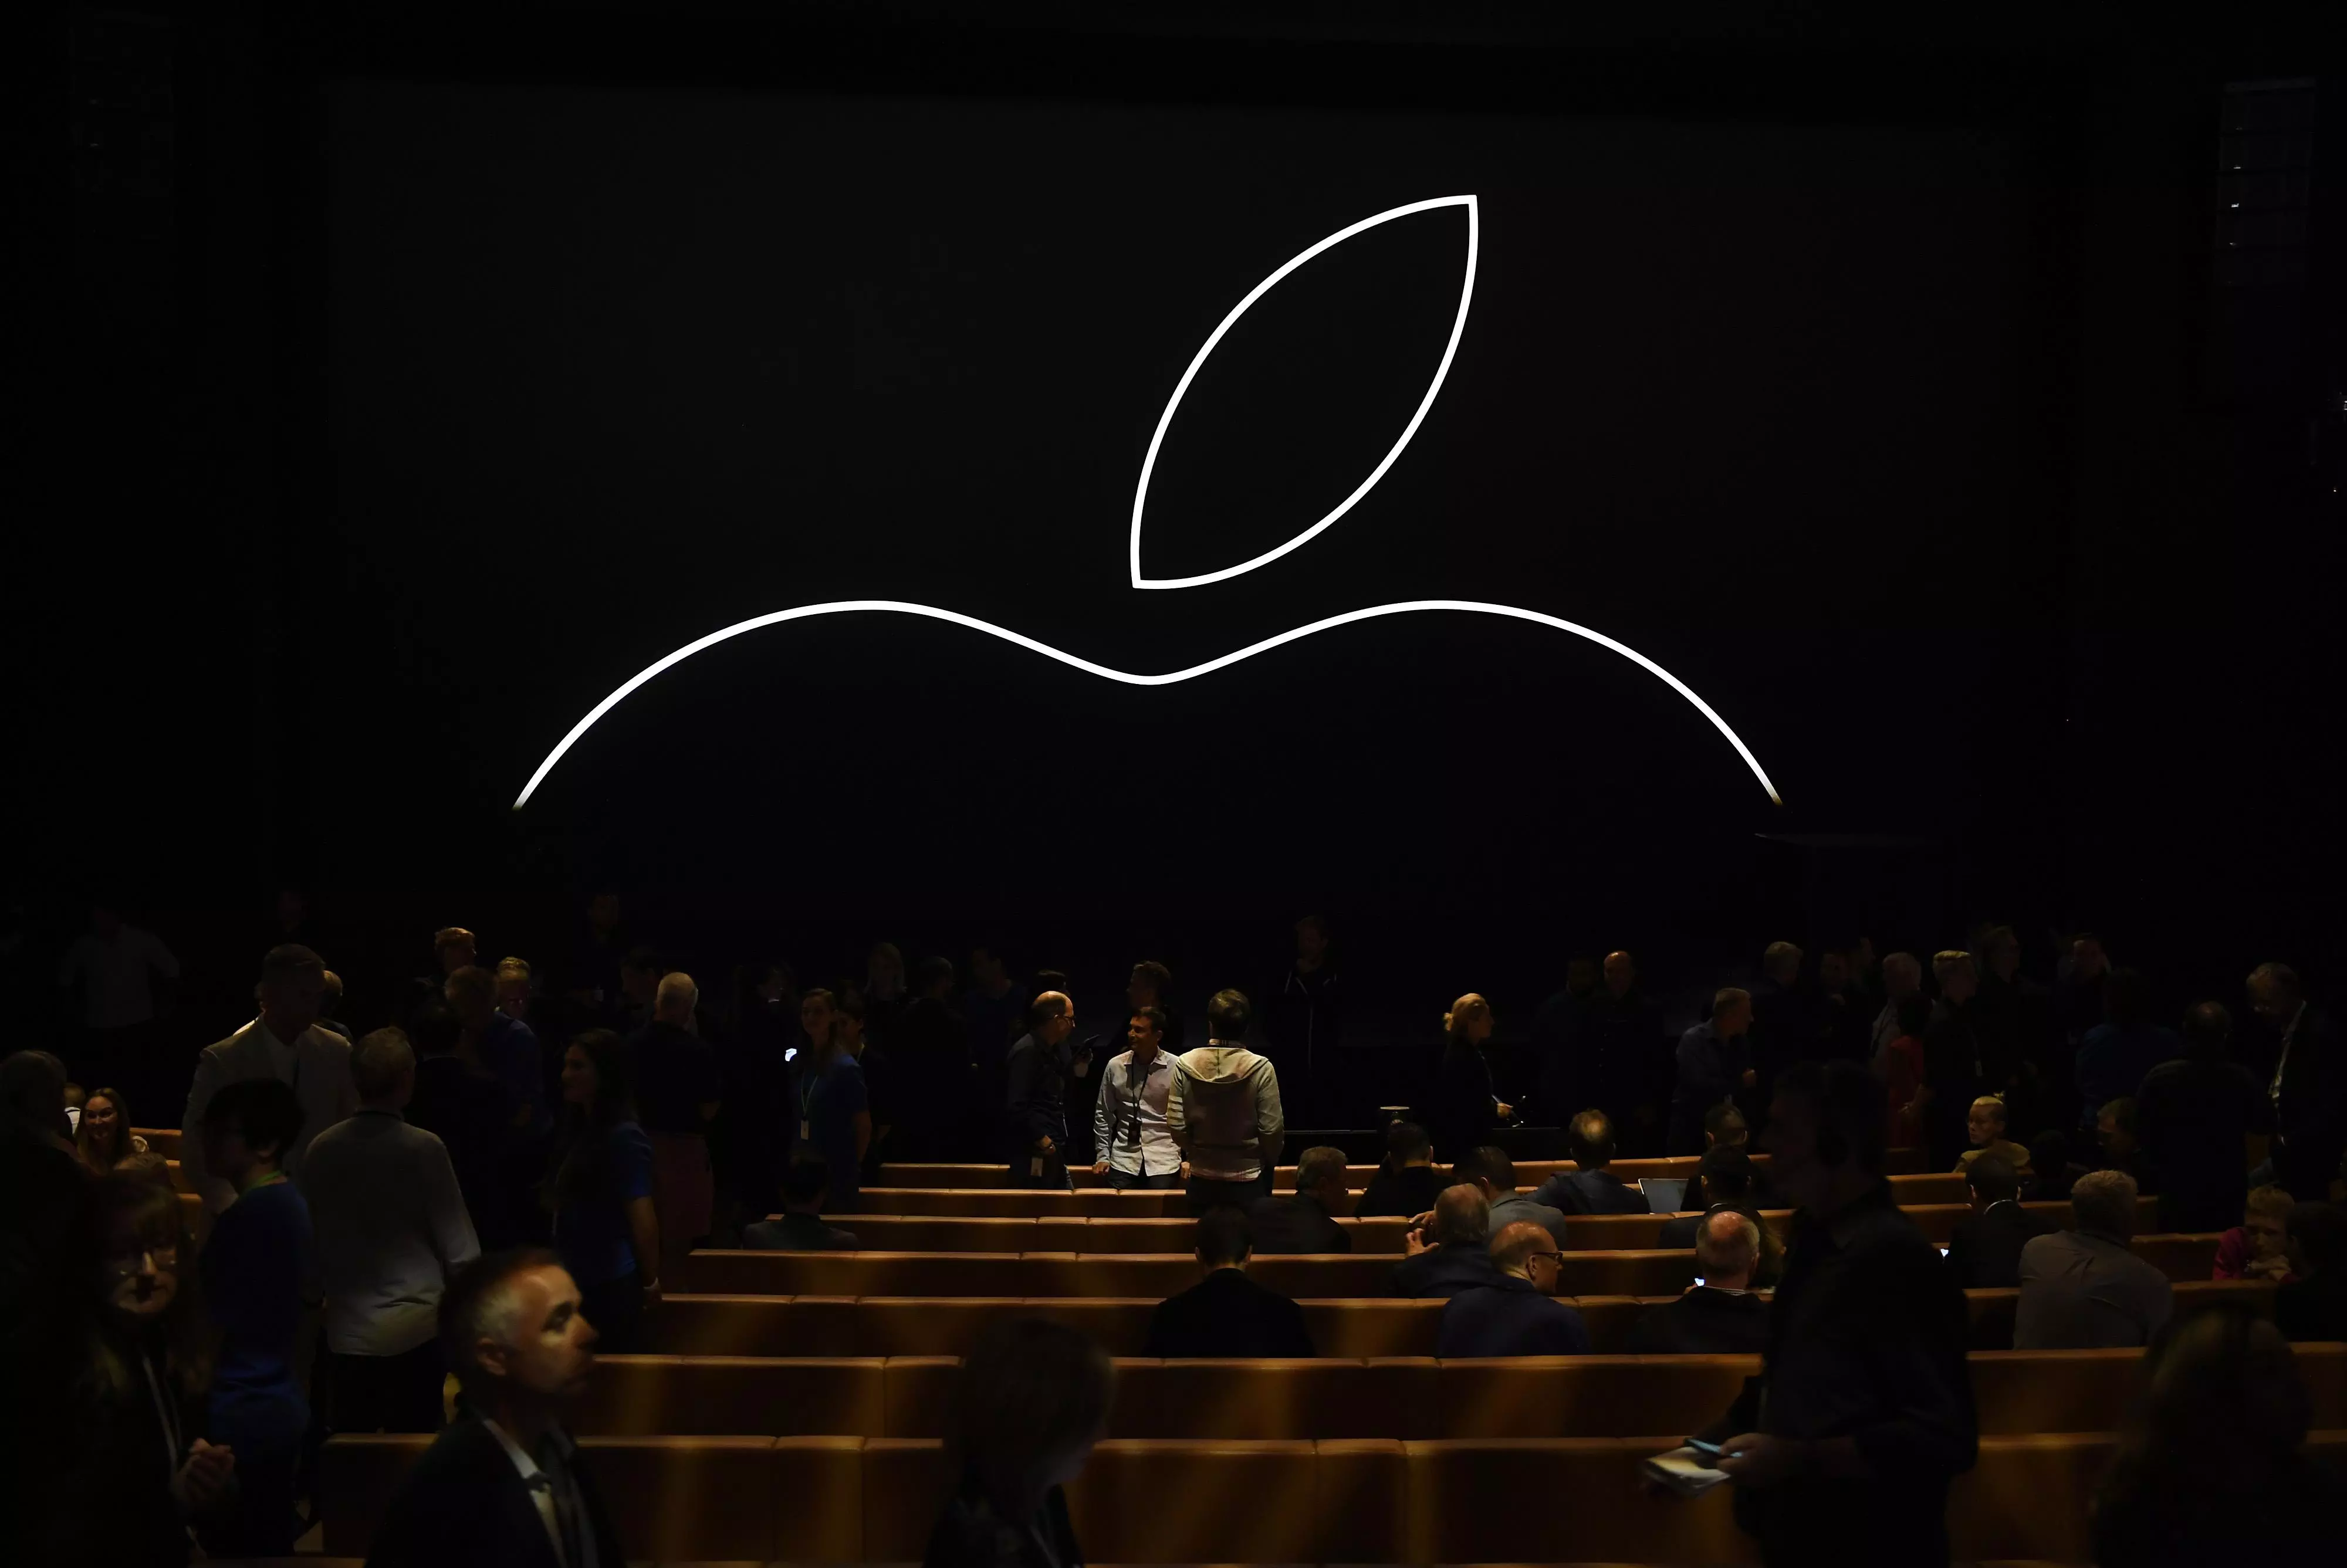 Apple conference